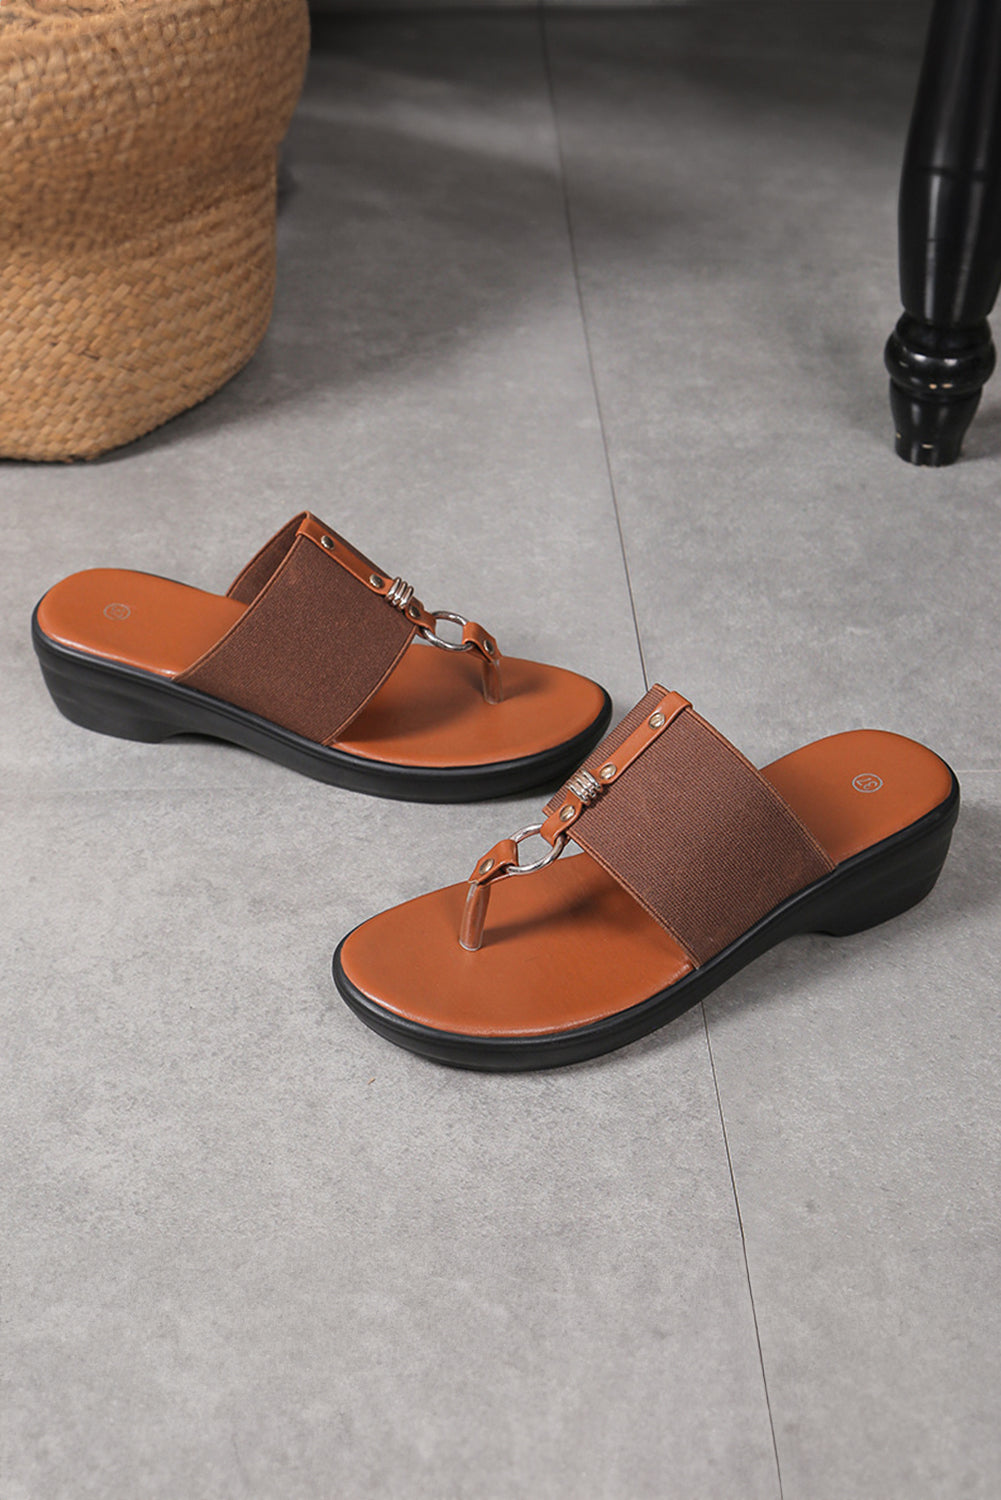 Chestnut Wide Band Clip Toe PU Leather Wedge Sandals